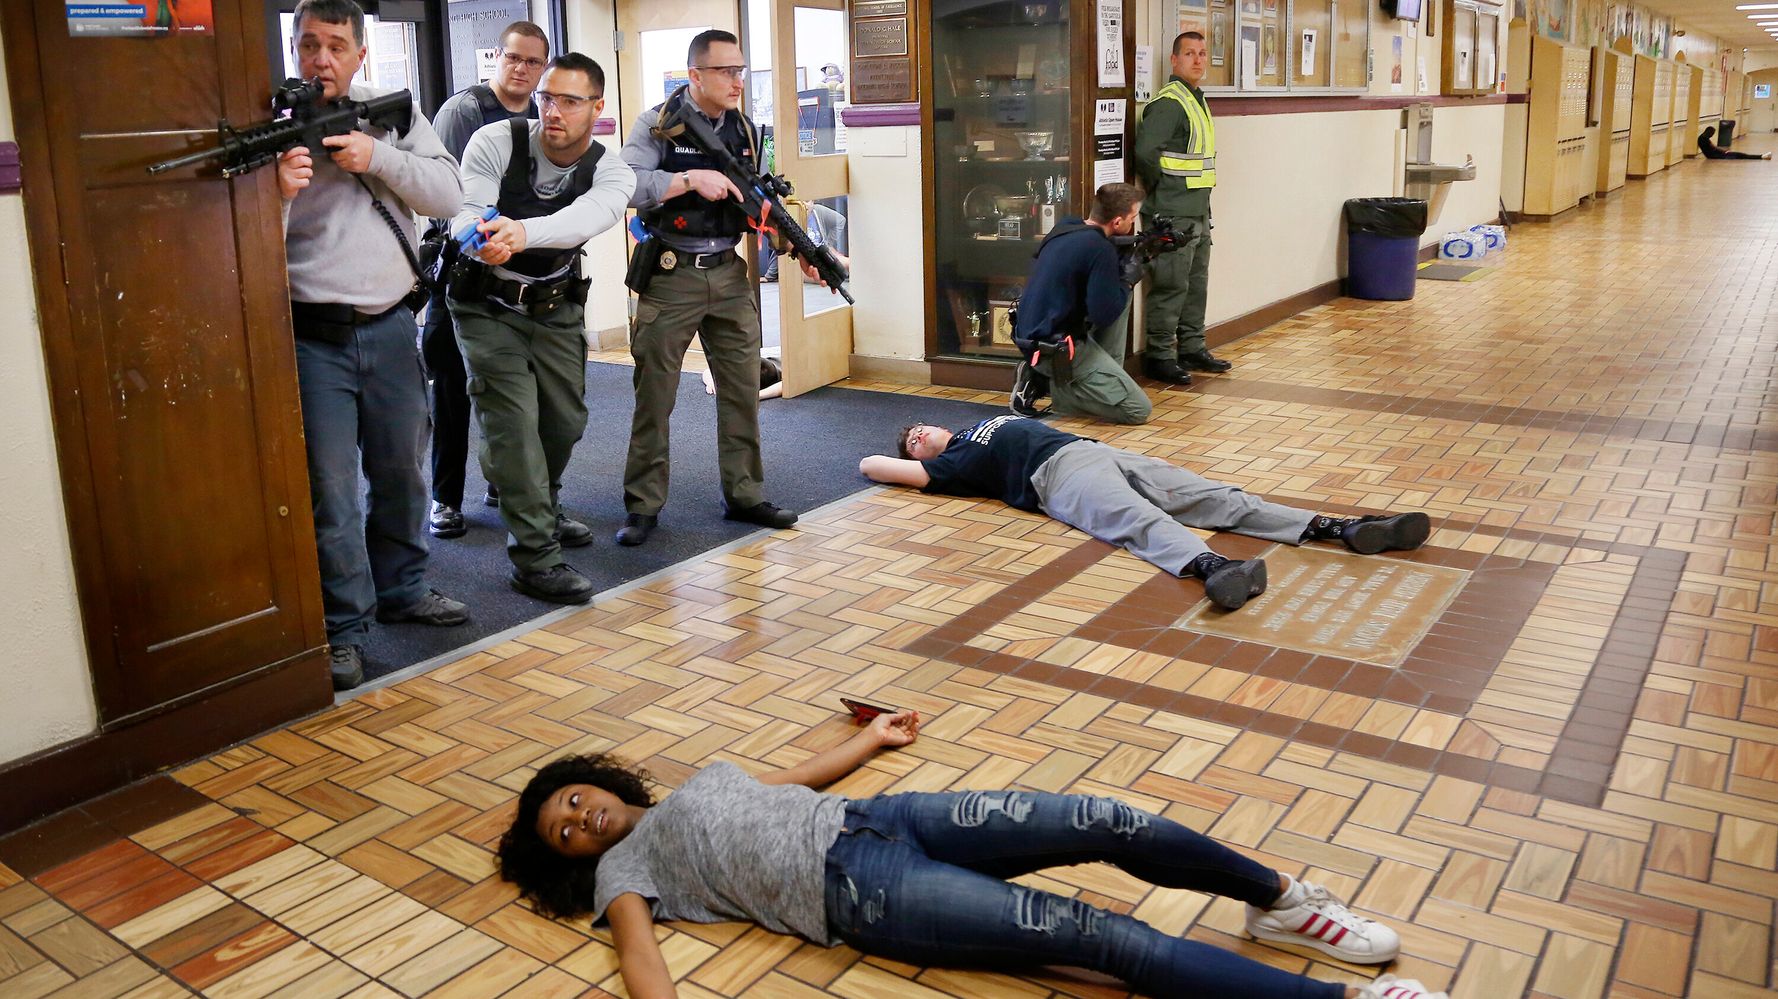 95% Of Schools Do Active Shooter Drills. Here's How It Affects Kids.